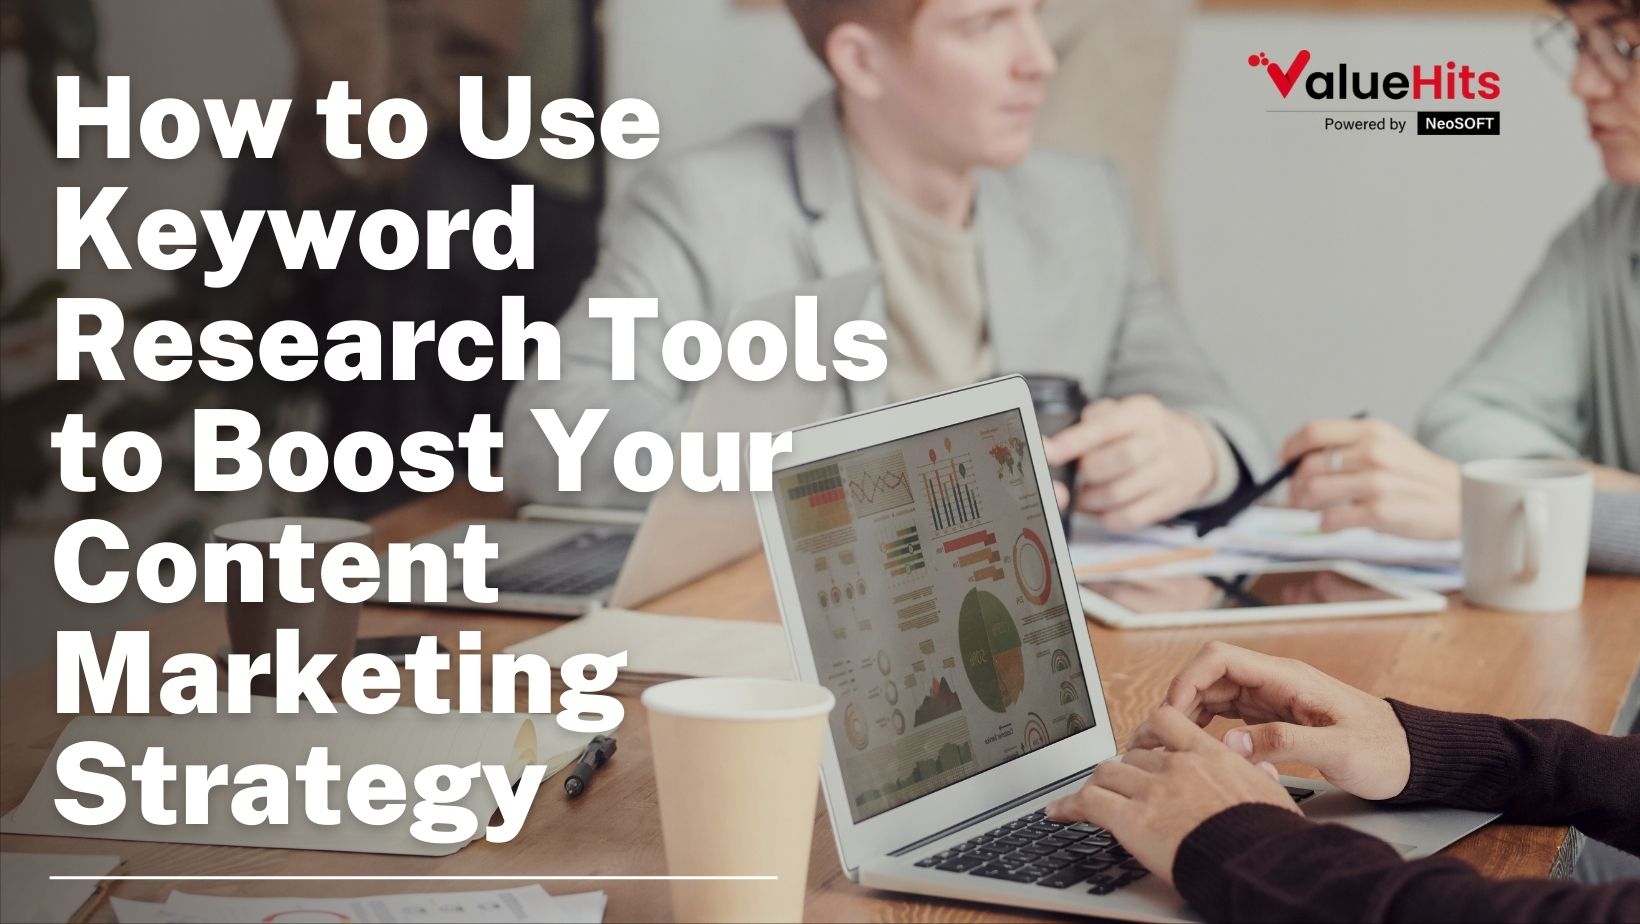 How to Use Keyword Research Tools to Boost Your Content Marketing Strategy